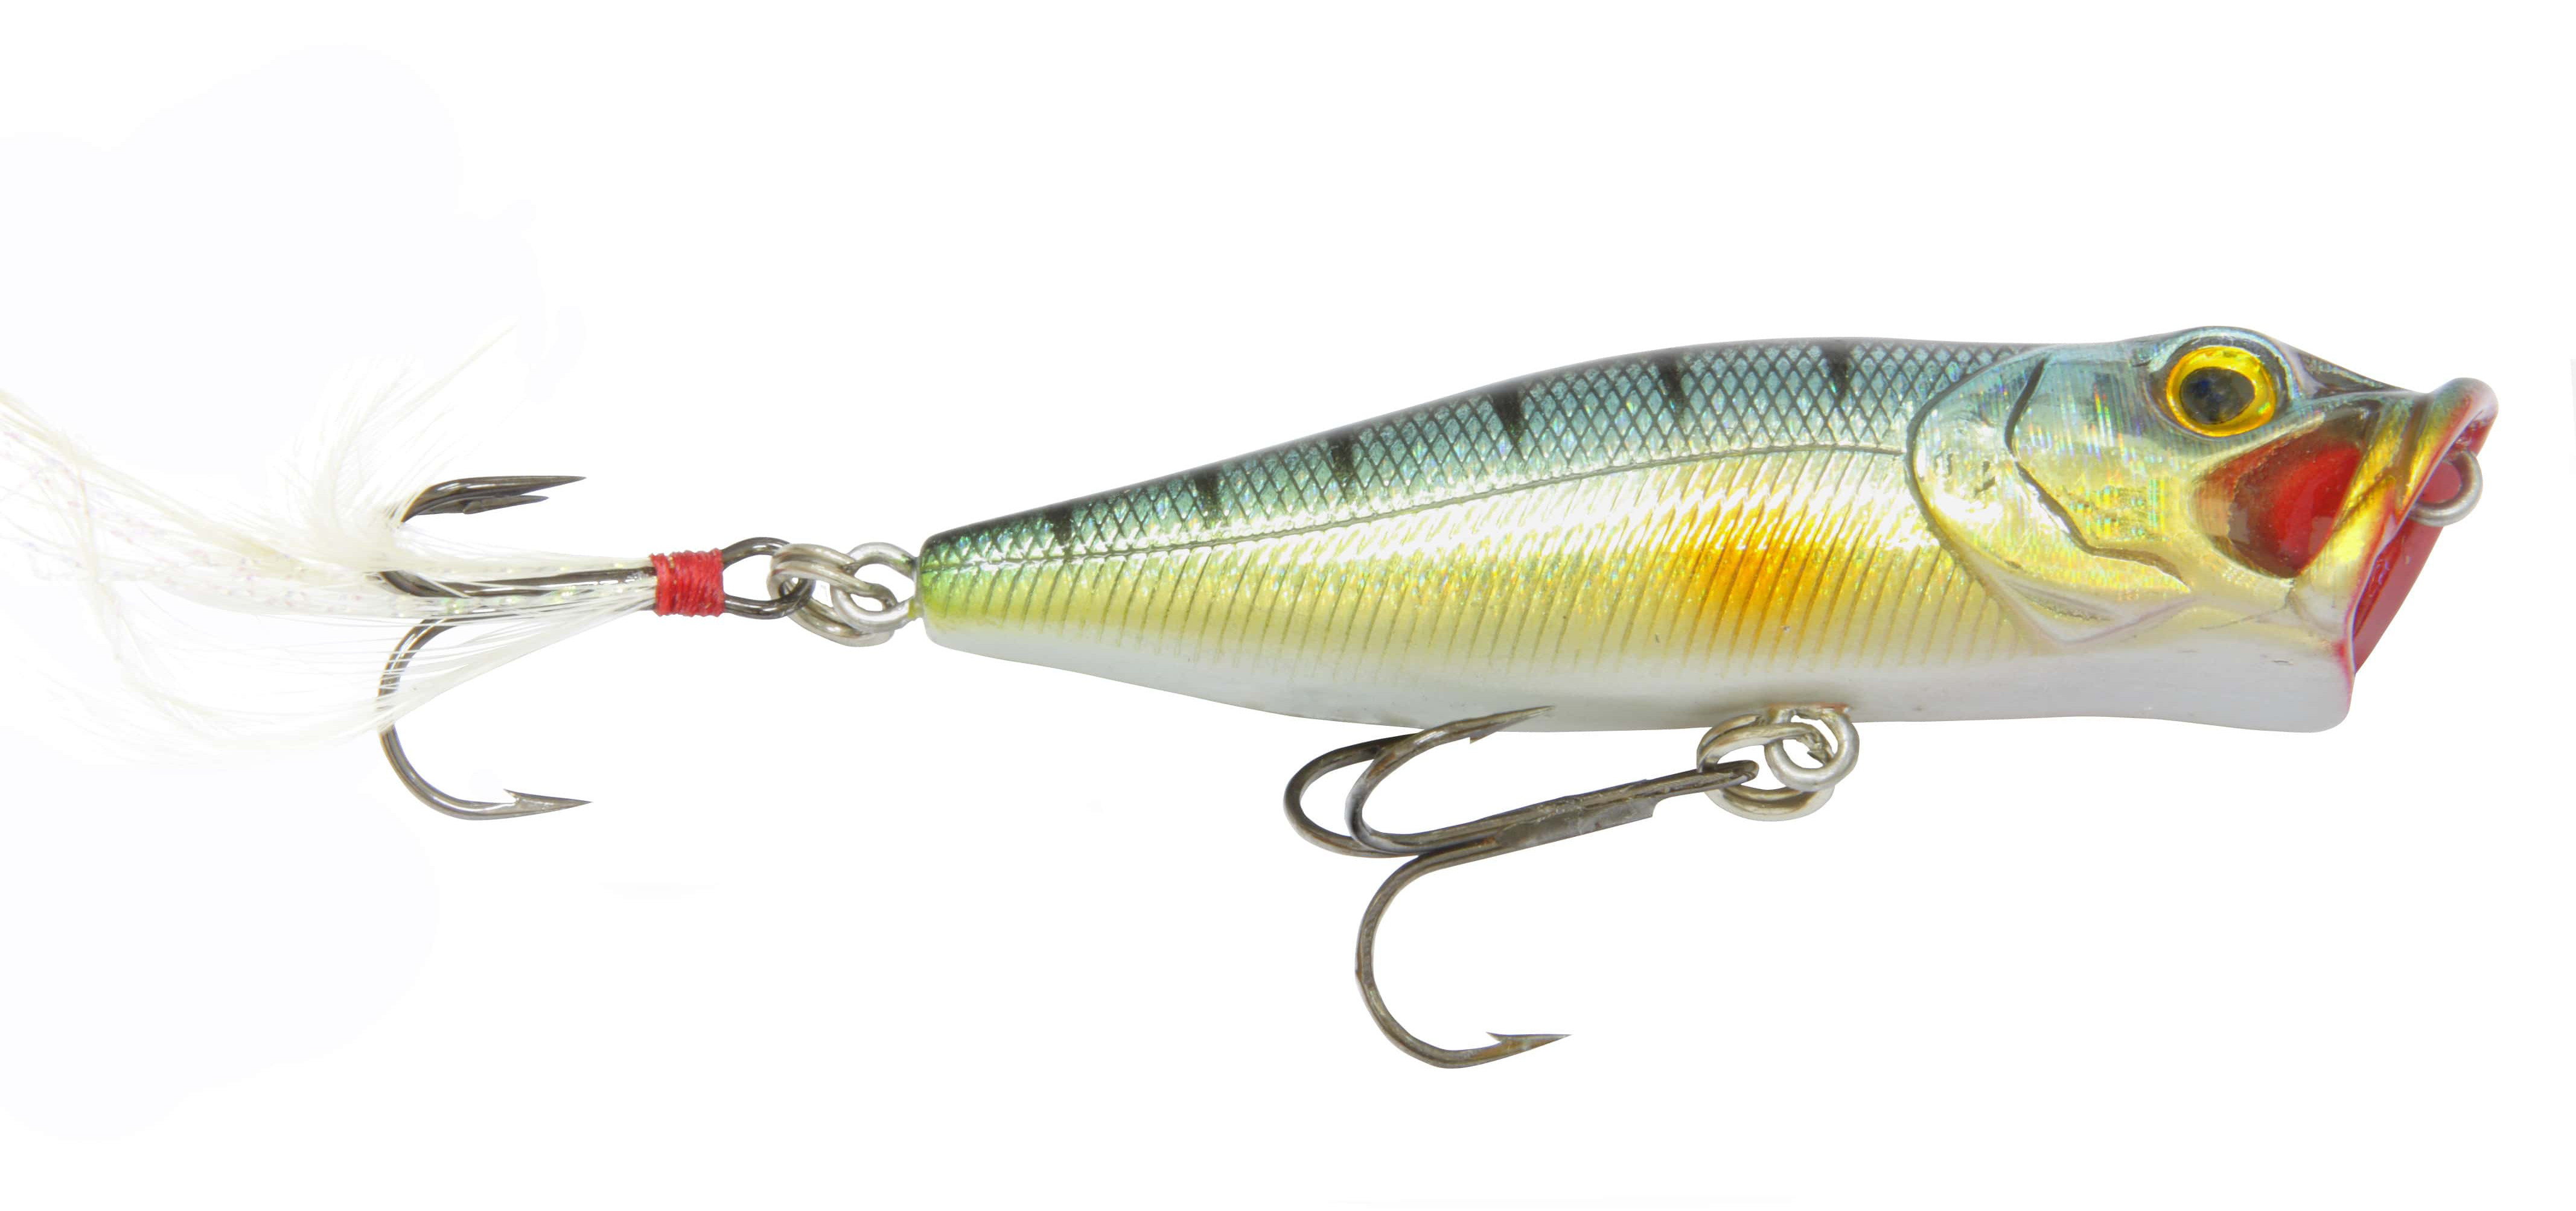 How to Use a Topwater Lure